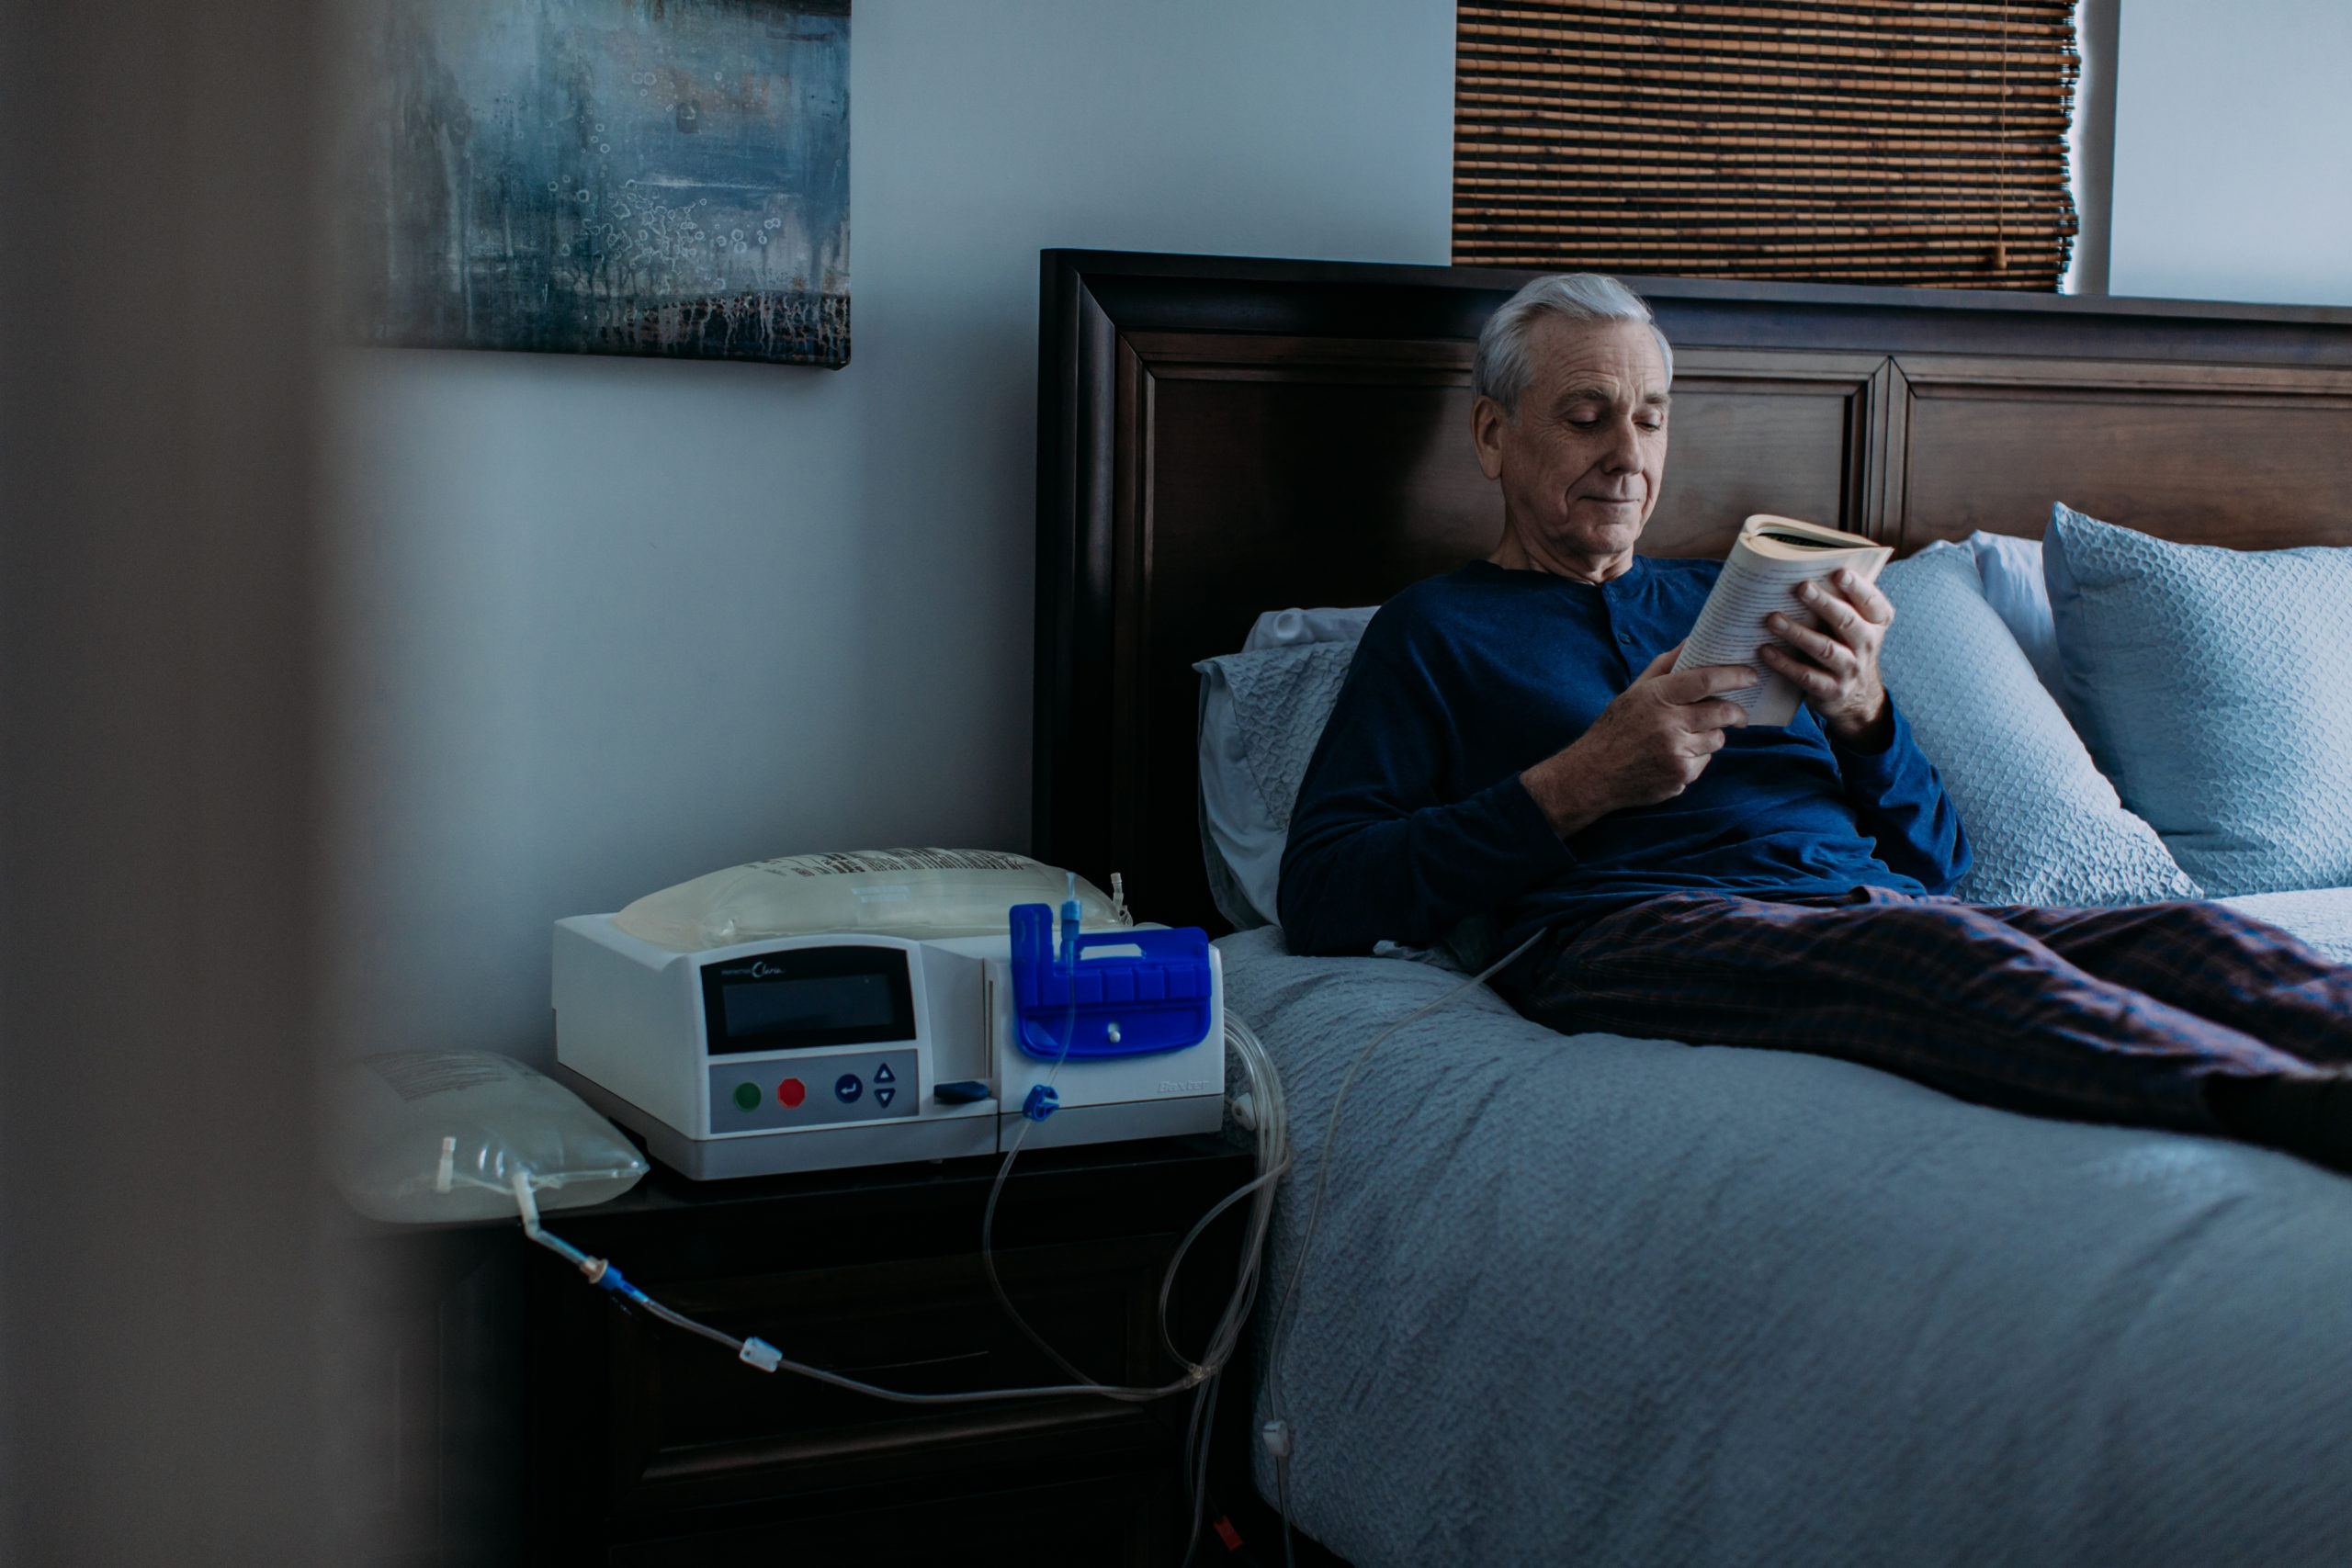 home-dialysis-and-remote-monitoring-is-changing-lives